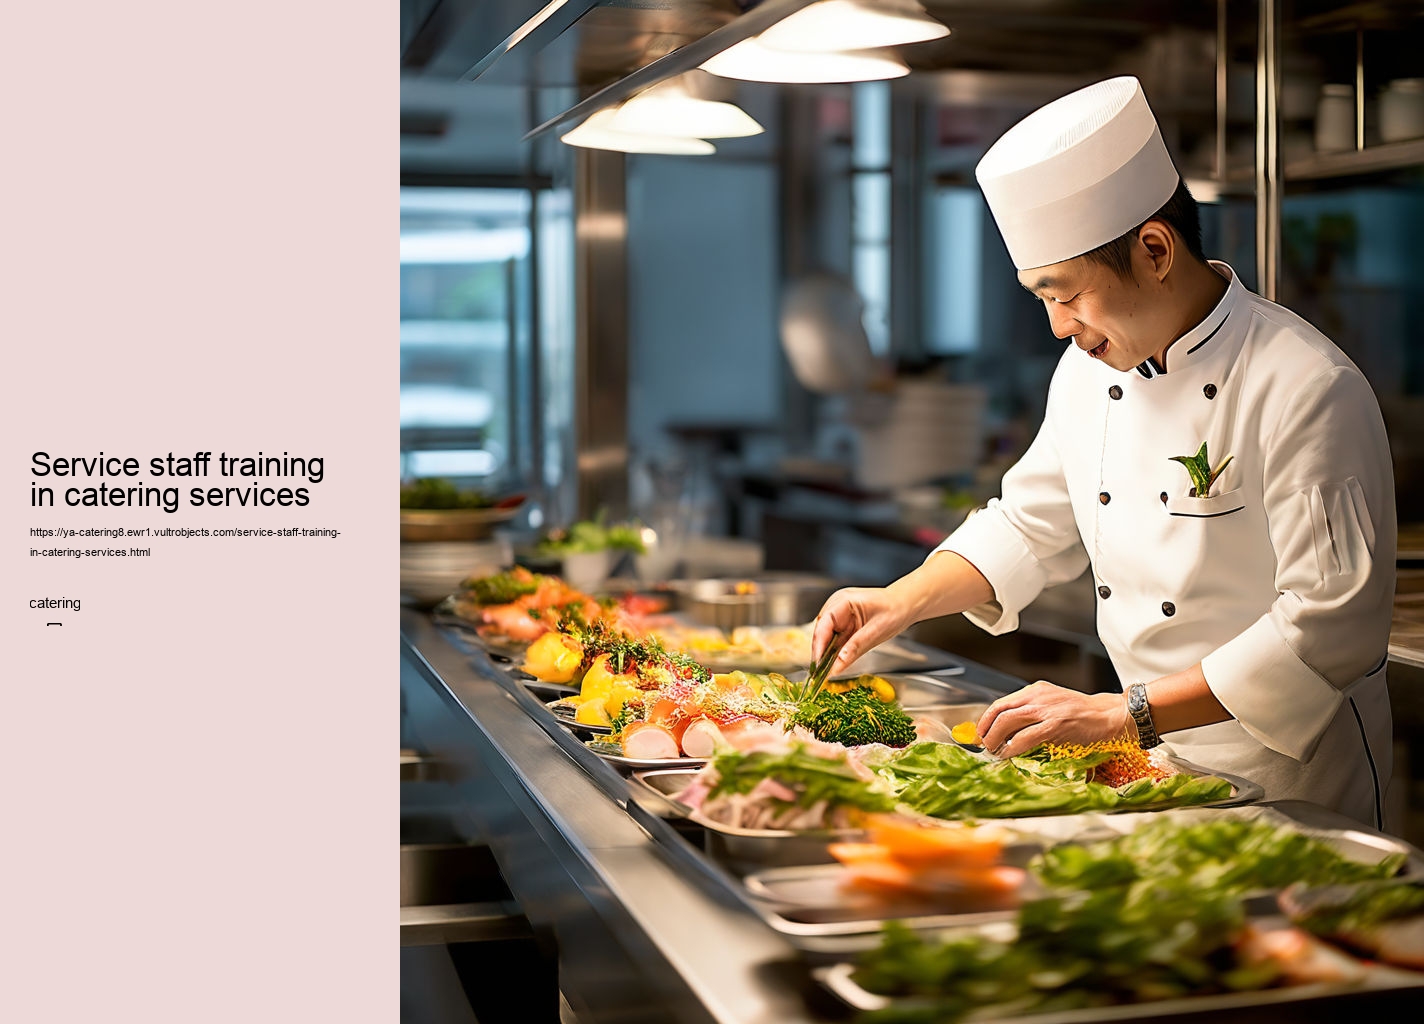 Service staff training in catering services